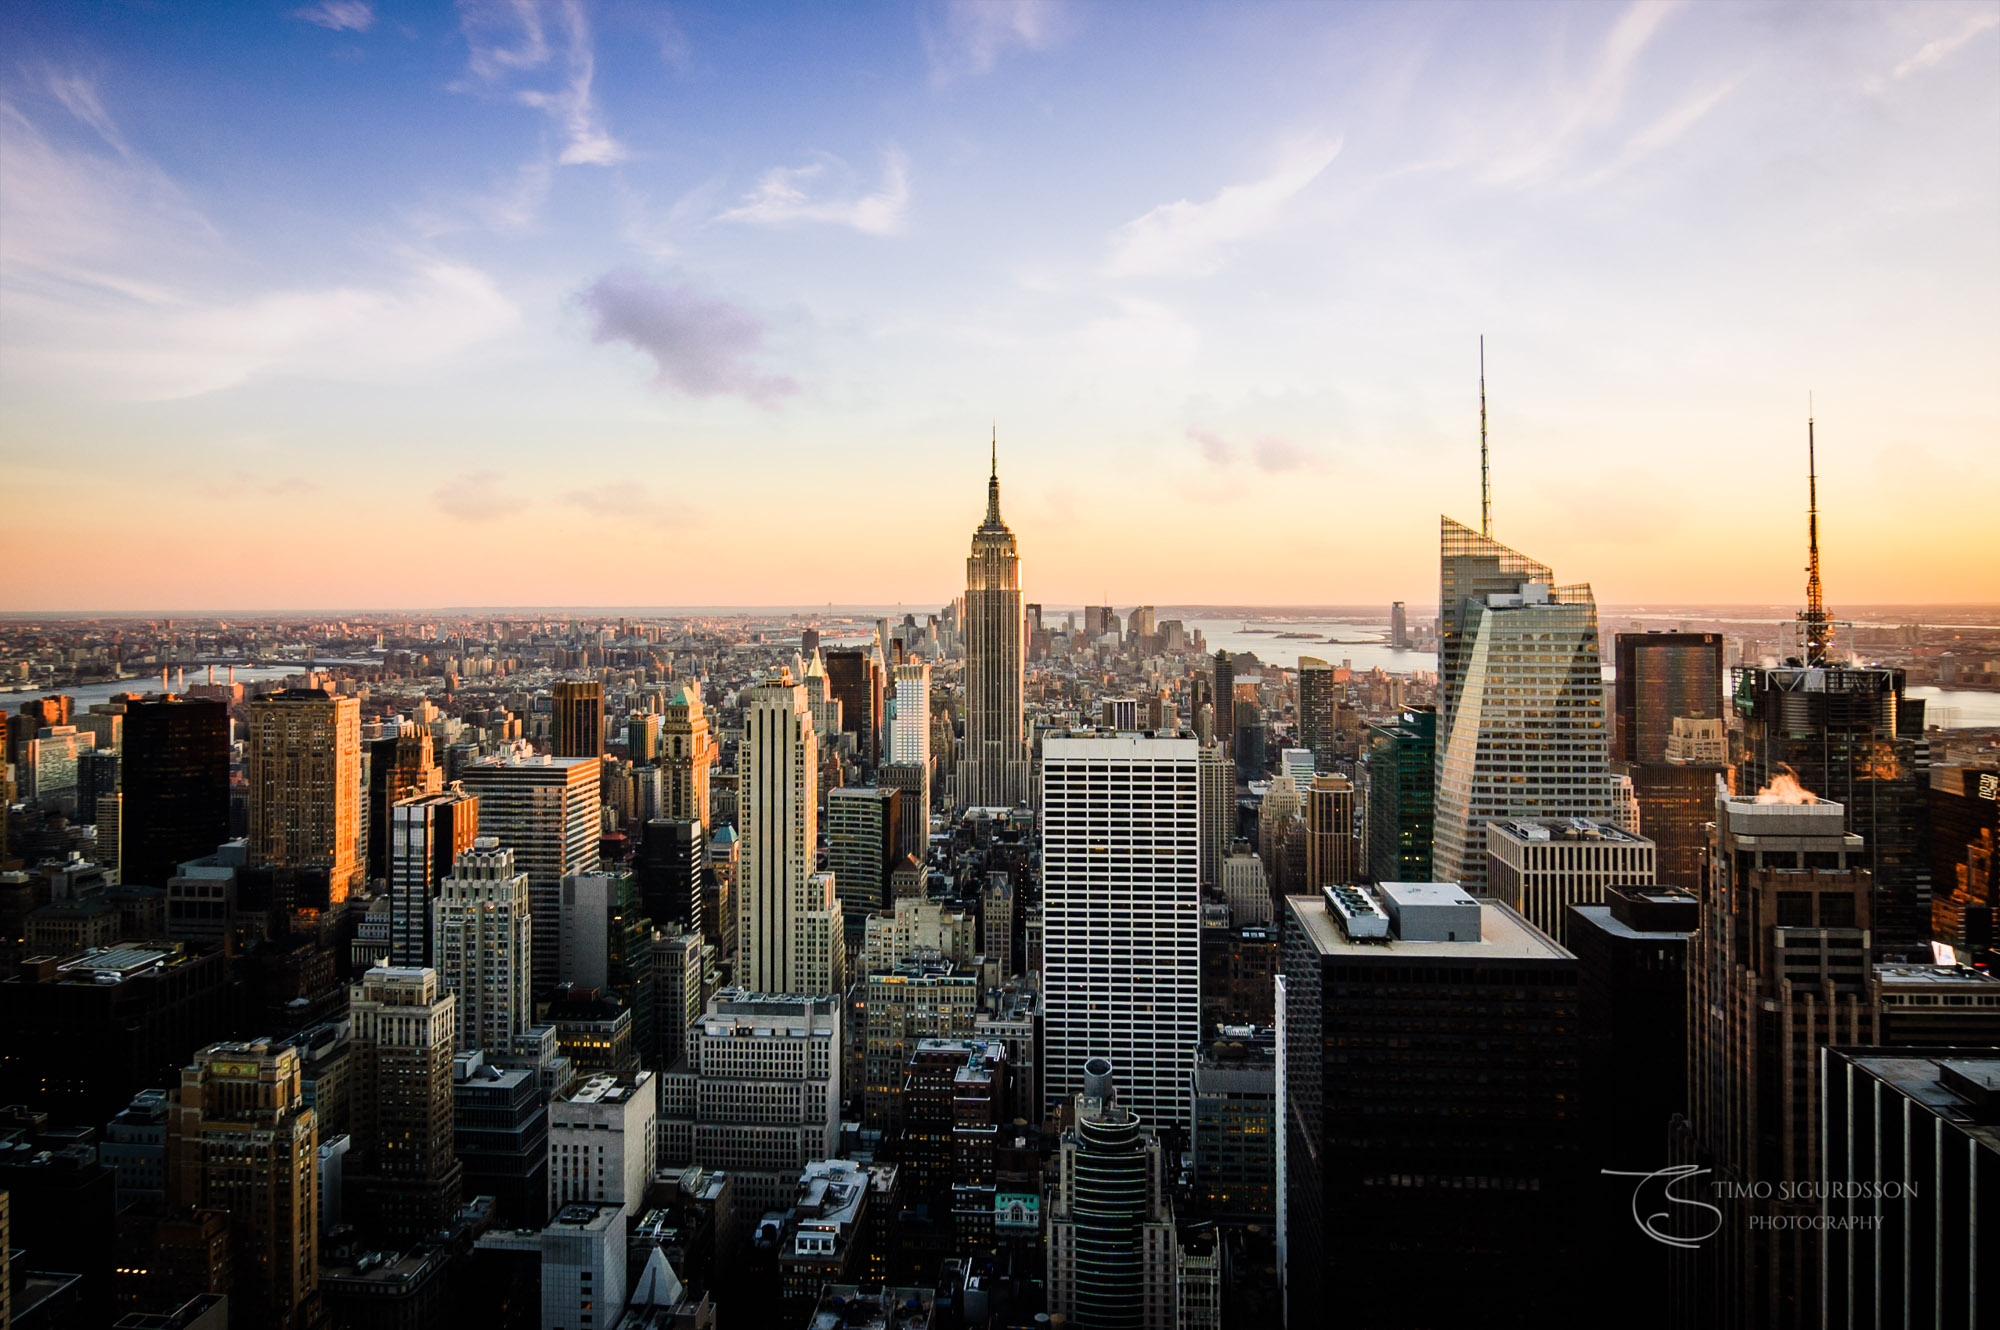 Manhattan, New York City. Skyline and Empire State Building at sunset.